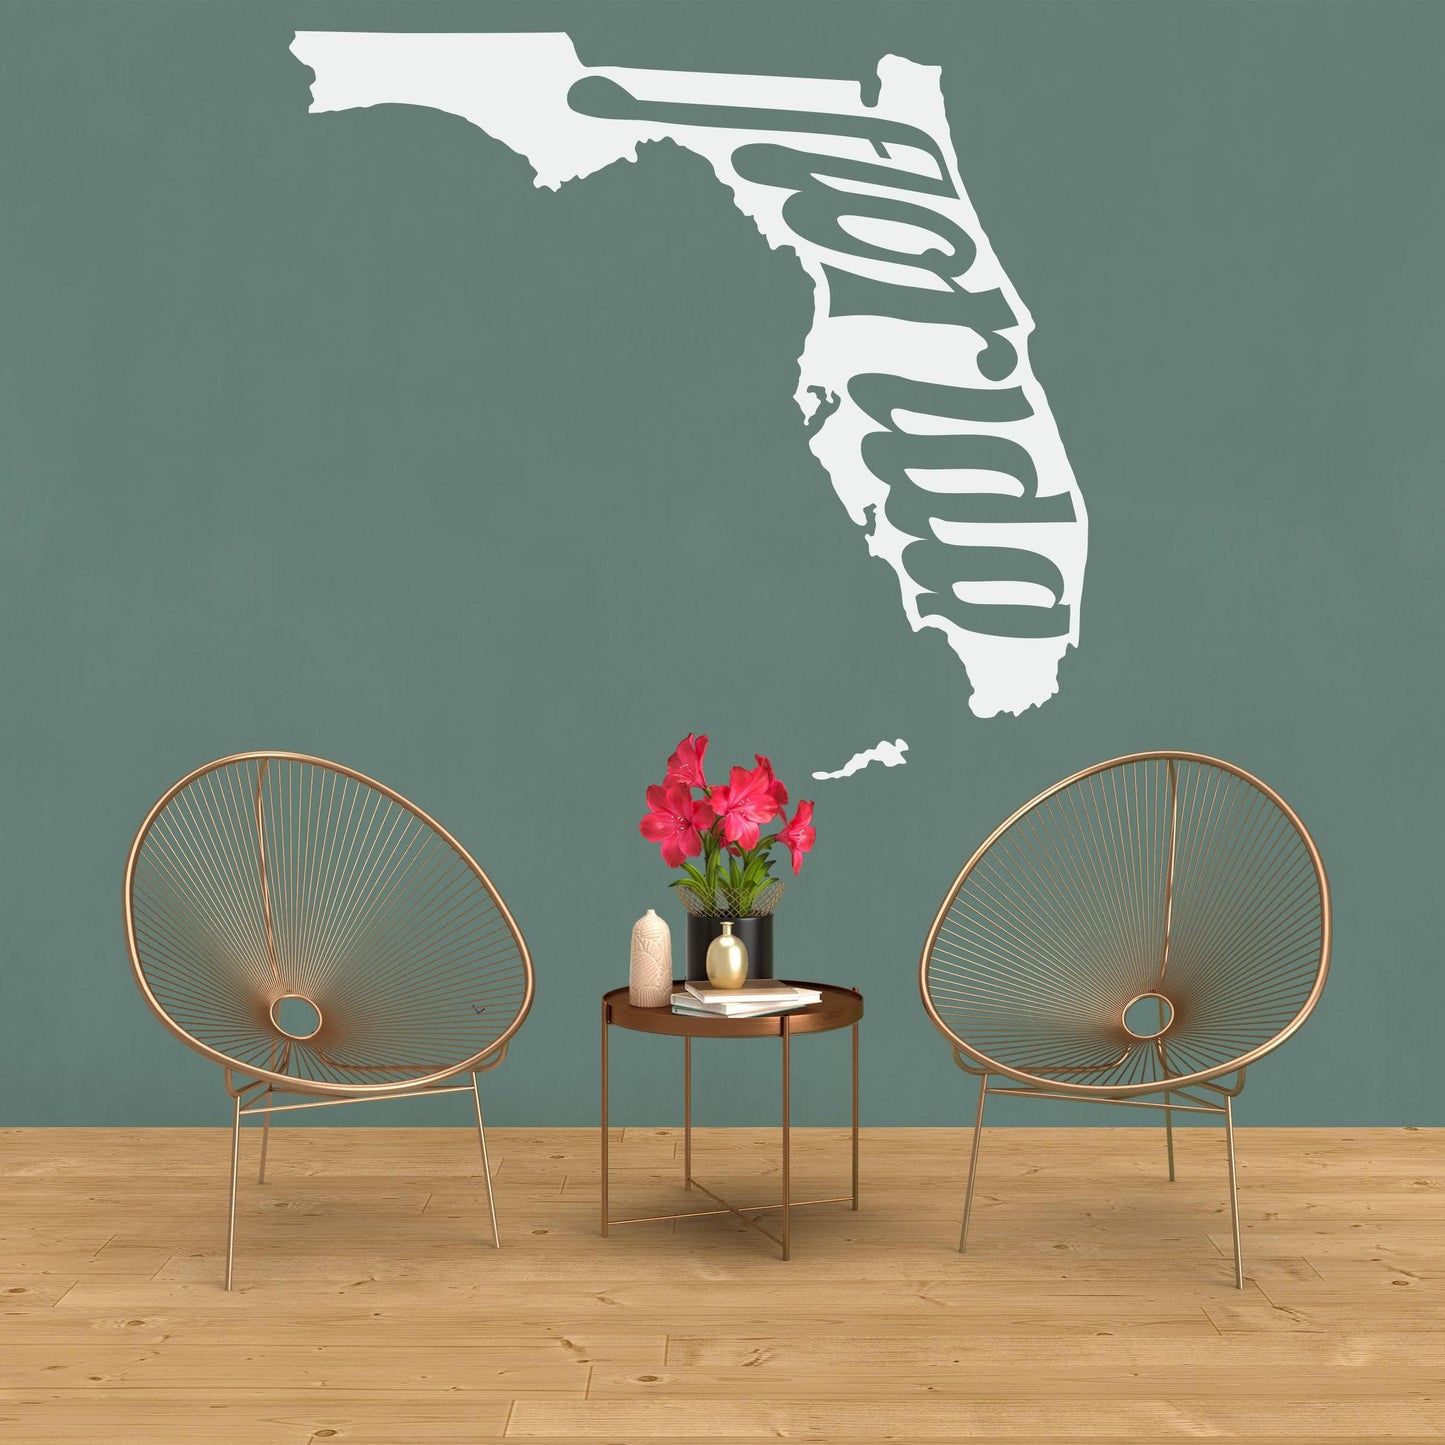 Florida State Vinyl Wall Decal Sticker. #OS_MB175